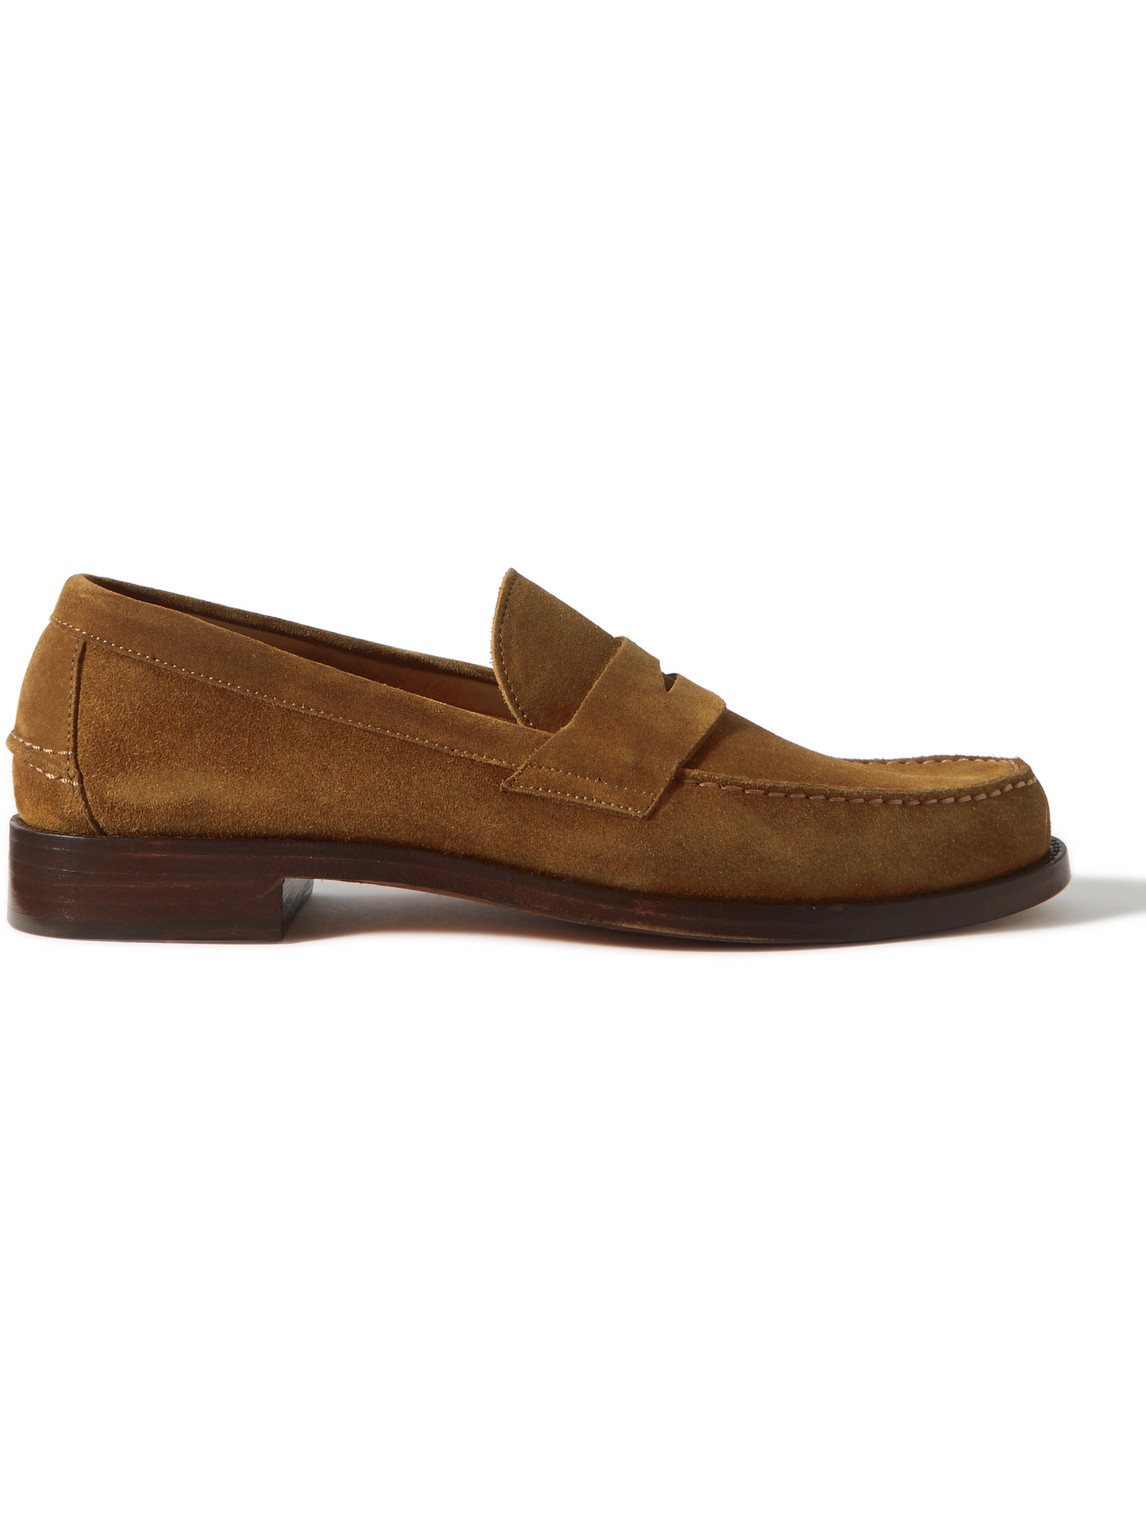 Sid Mashburn Suede Penny Loafers In Brown